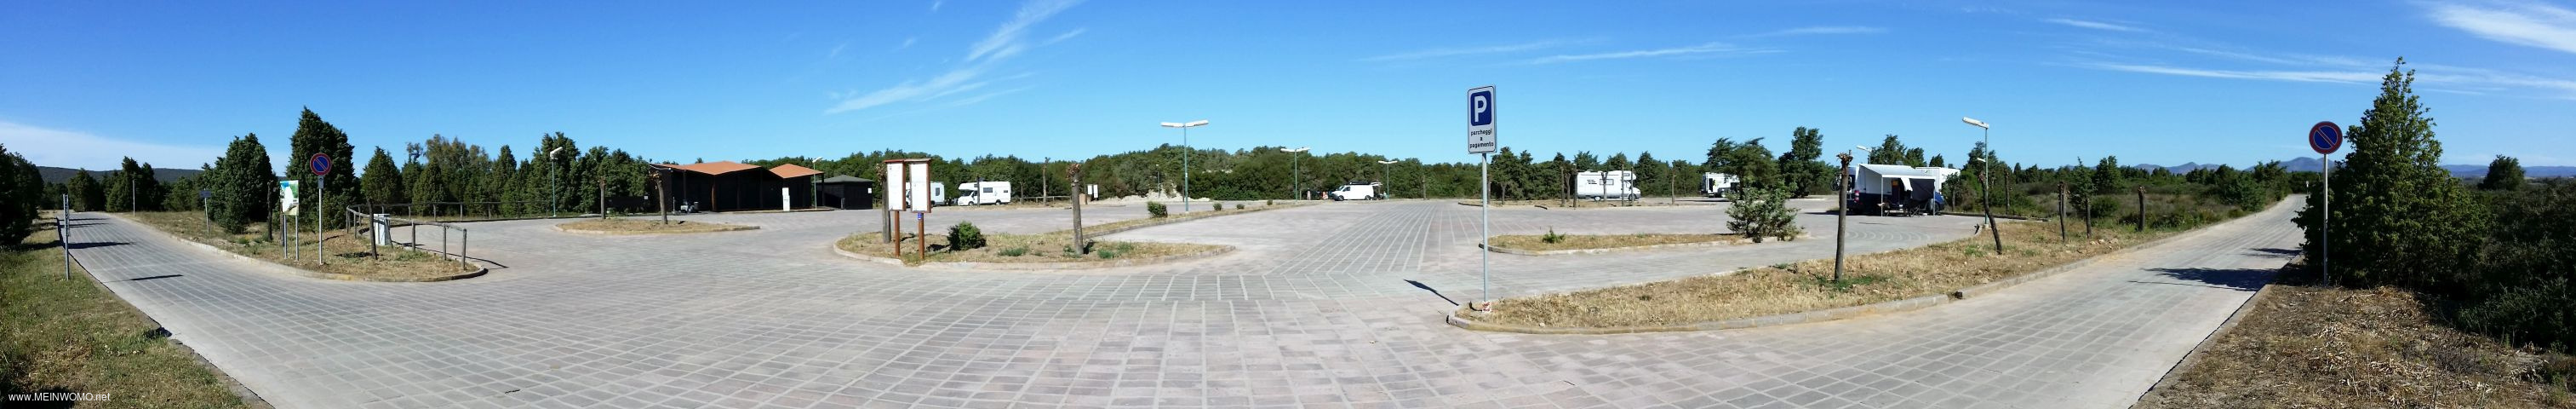  Large paved parking, left the access road.